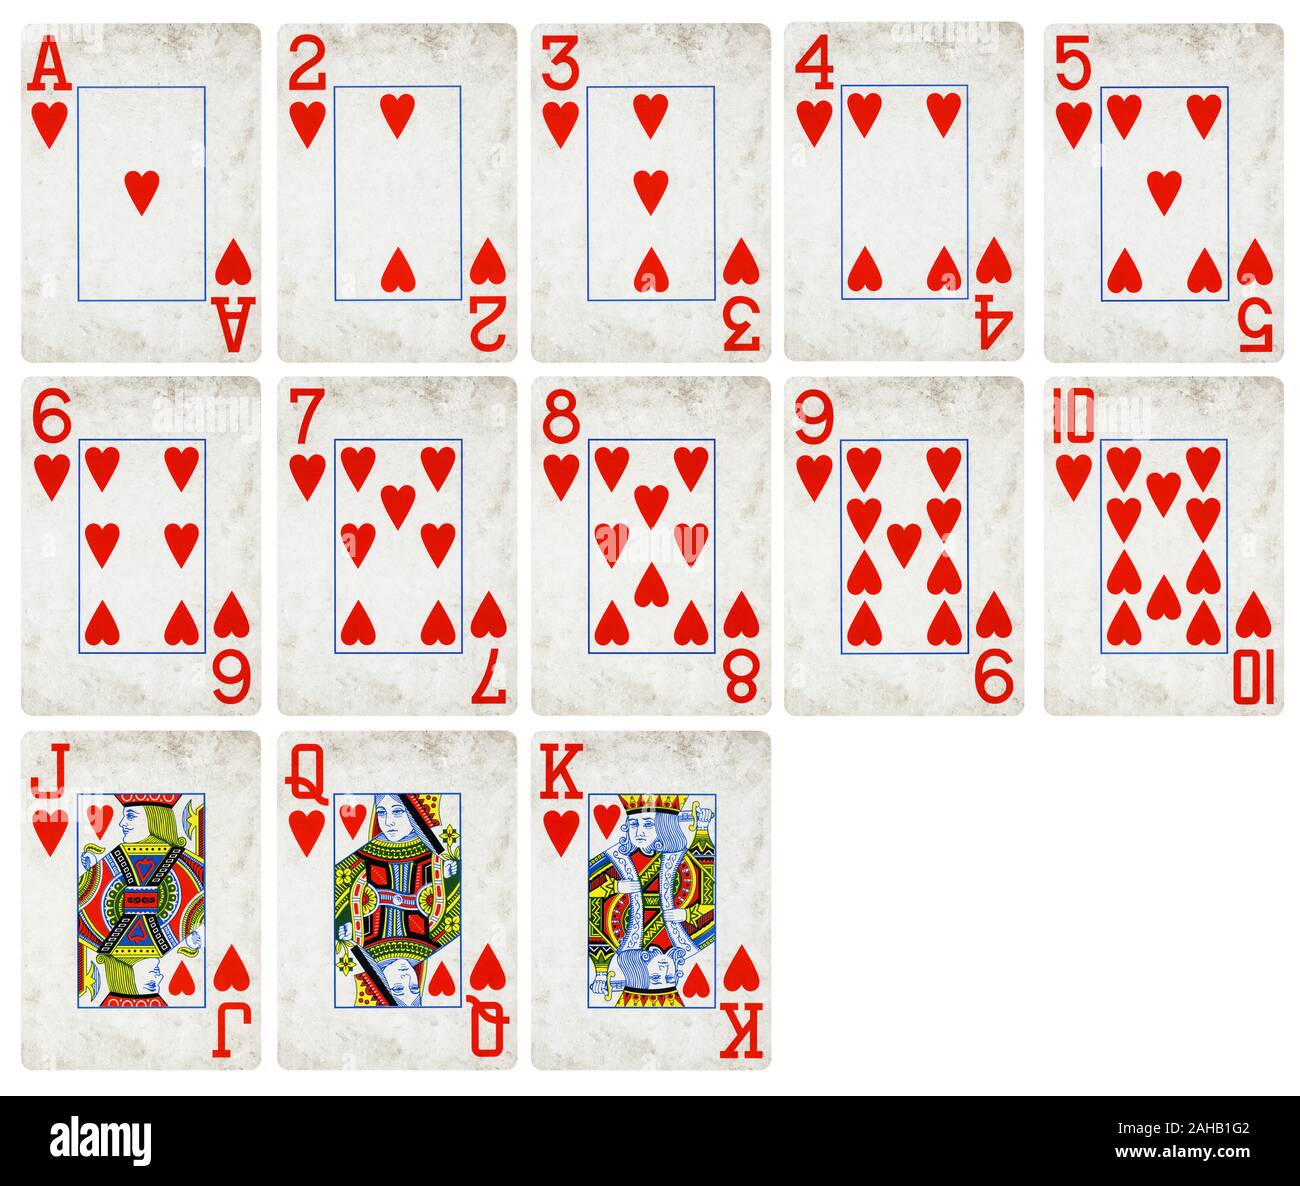 Vintage Playing cards of Hearts suit isolated on white background - High quality. Stock Photo